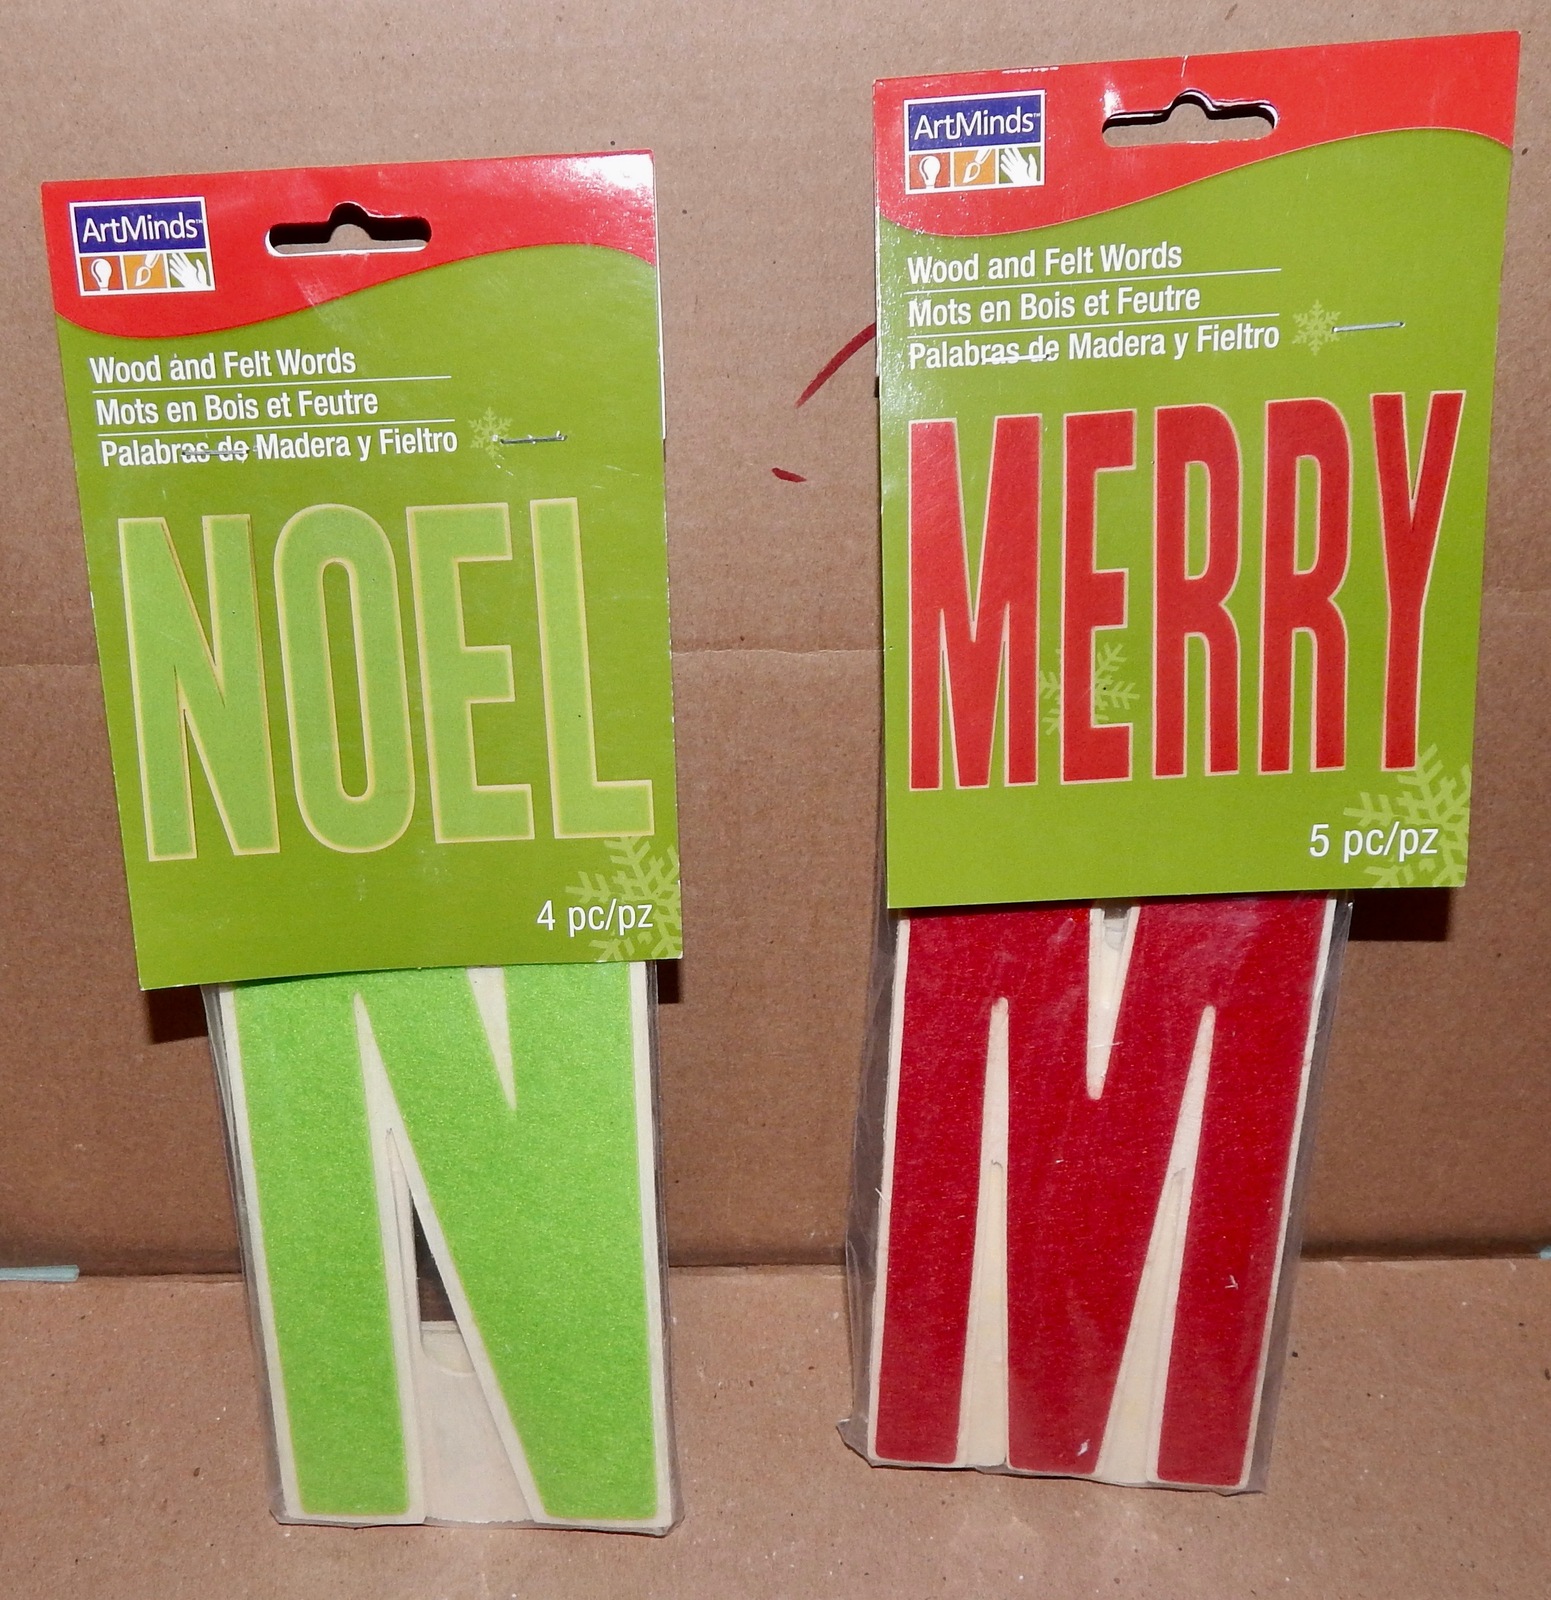 Christmas Wood & Felt Words Signs 9pc Total Nole & Merry Red & Green 9" x4" 175J - $9.49